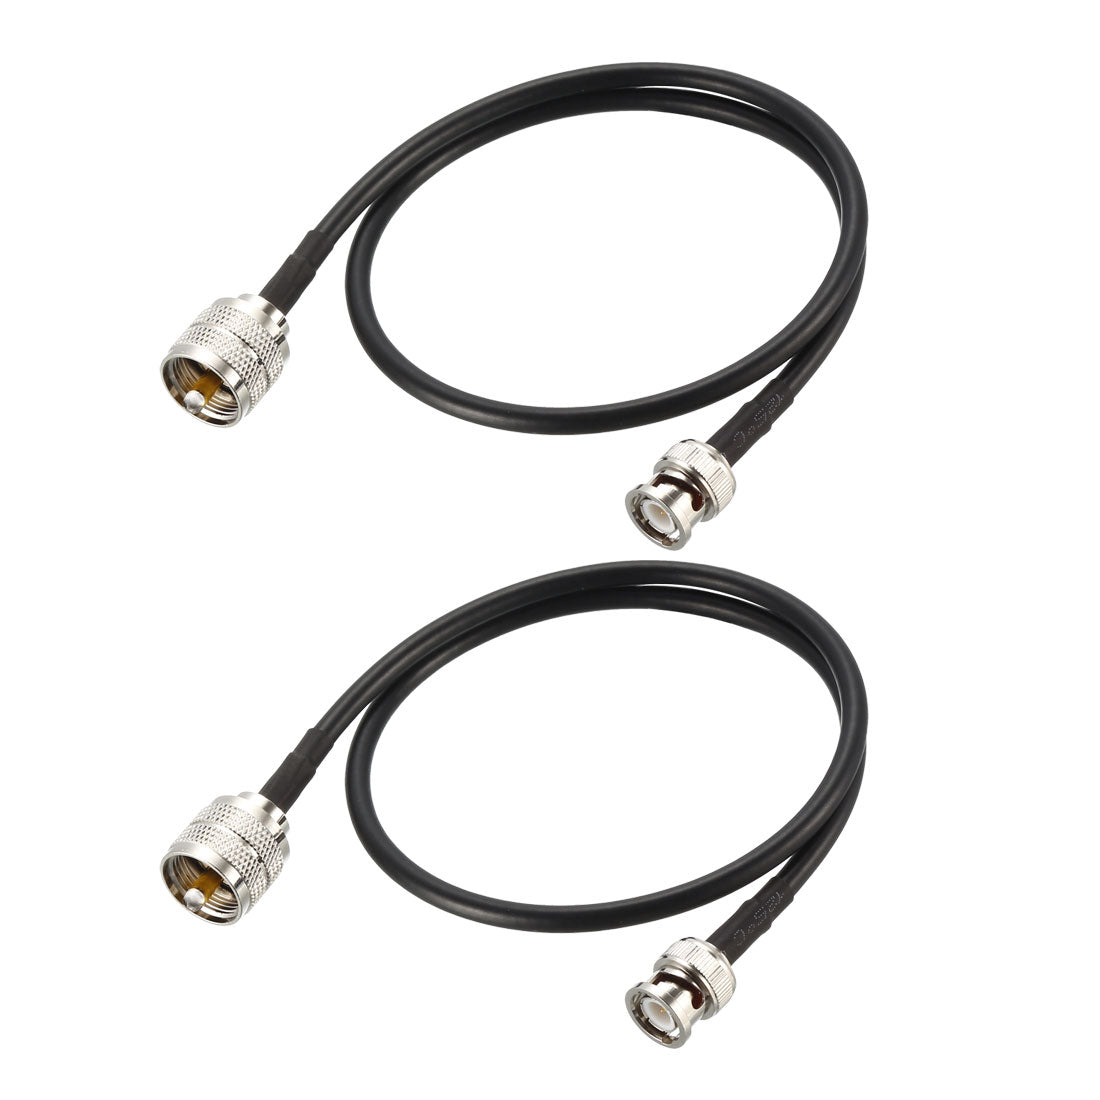 uxcell Uxcell UHF () to BNC Male Antenna Radio Cable RG58 Coax Cable 22 Inches 2pcs